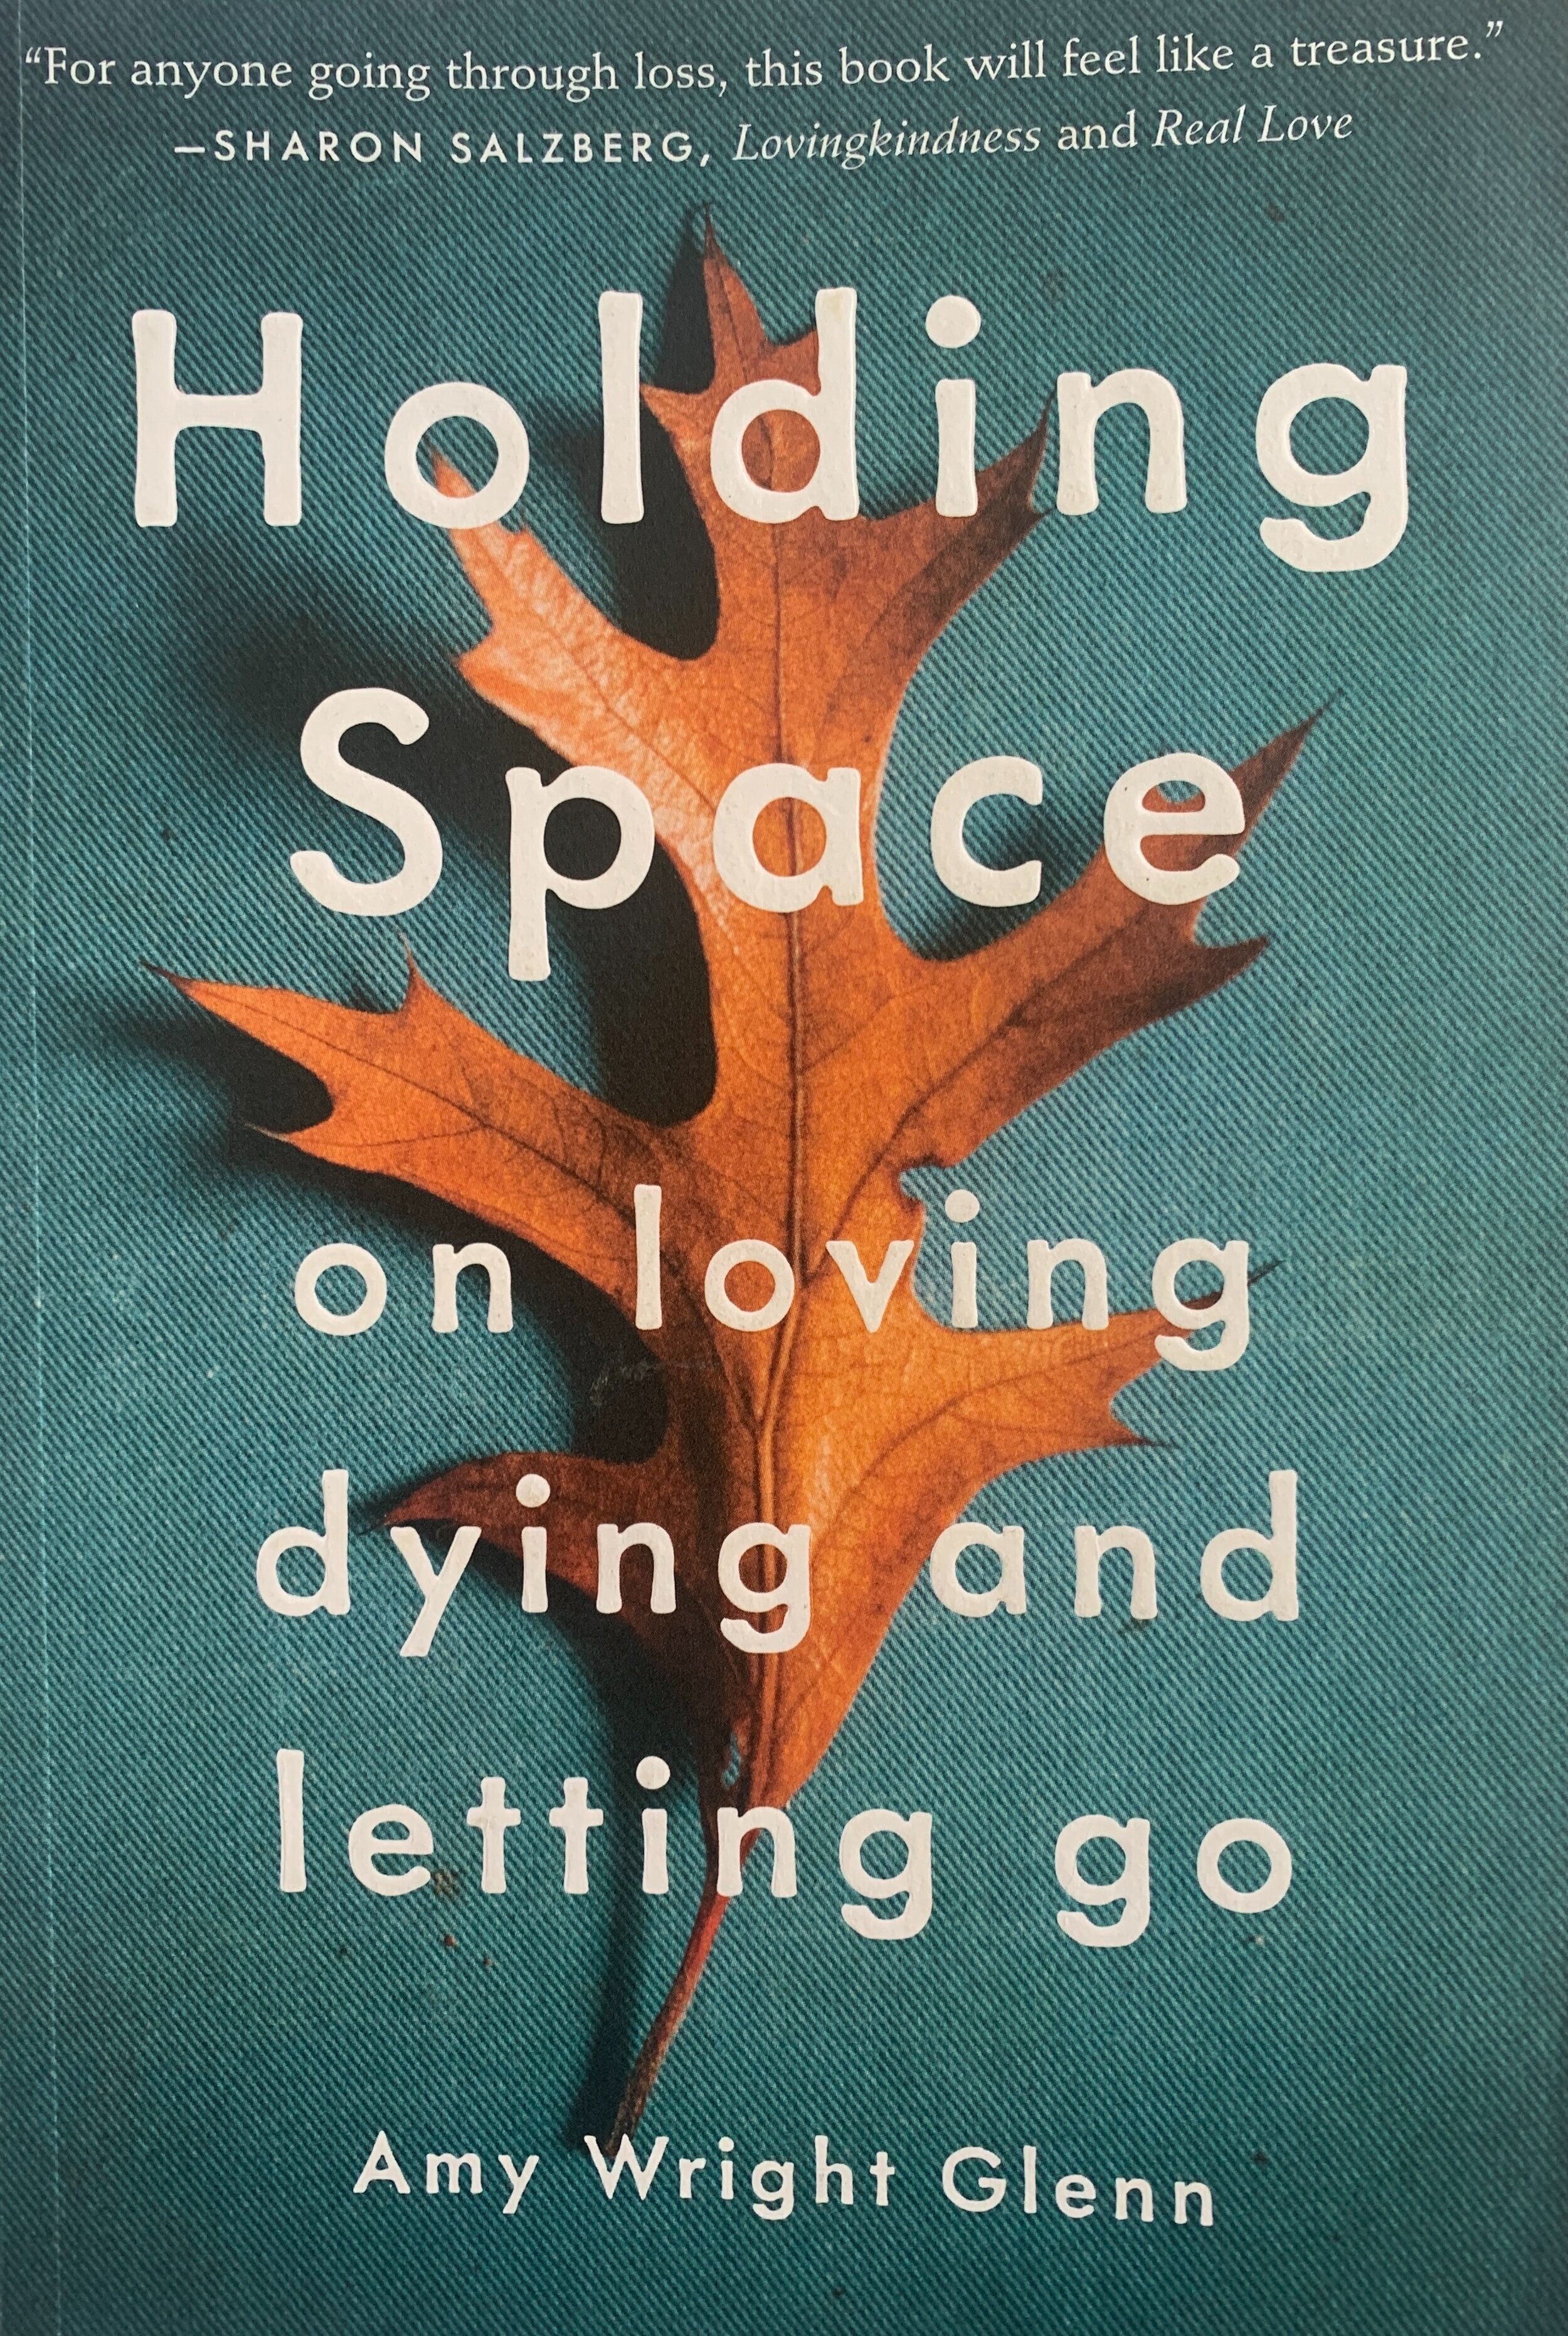 Holding Space on Loving, Dying, and Letting Go (Copy) (Copy) (Copy)